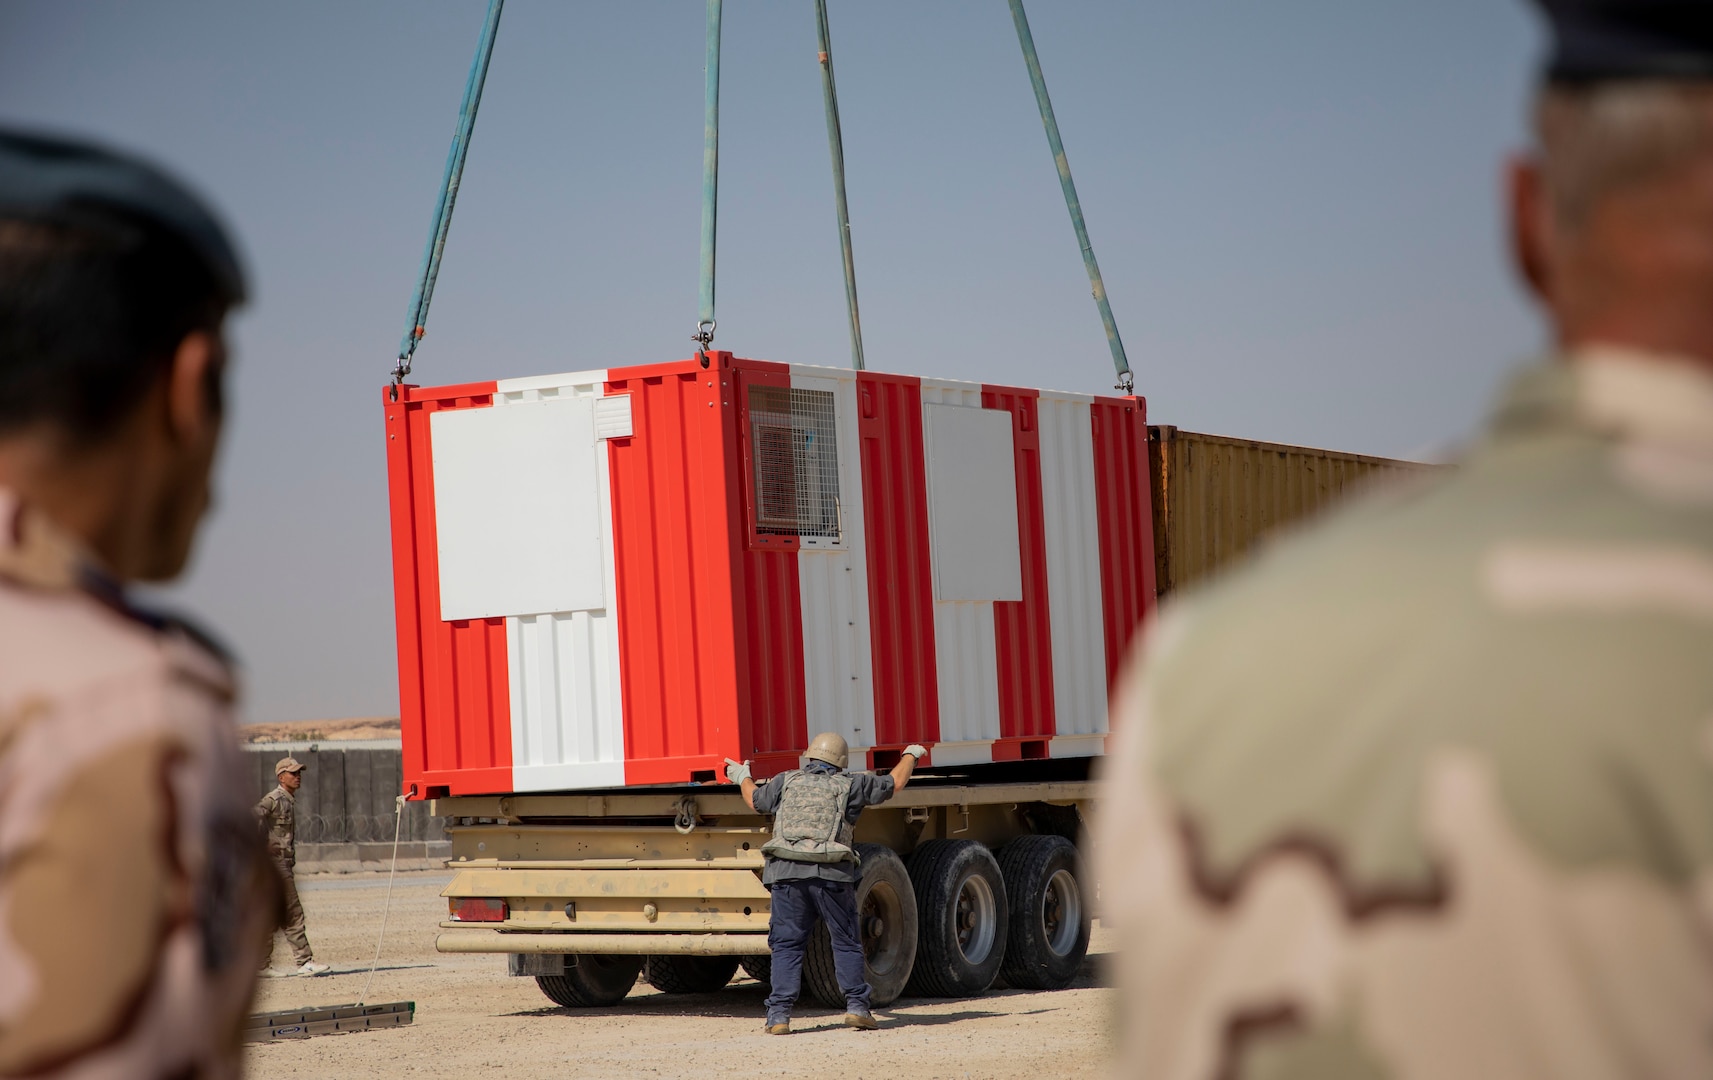 U.S. and Iraqi forces gather for the divestment of equipment from the U.S. government to the government of Iraq at a transfer point near Al Asad Air Base, Iraq, Oct. 15, 2020. Iraqi Maj. Gen. Saadoom Fouad, Q-West Air Base commander, received several containers consisting of air traffic control equipment that will build the Iraqi air force's capability to continue the fight to defeat the Islamic State of Iraq and Syria.(U.S. Army Reserve photo by Spc. Jorge Reyes)